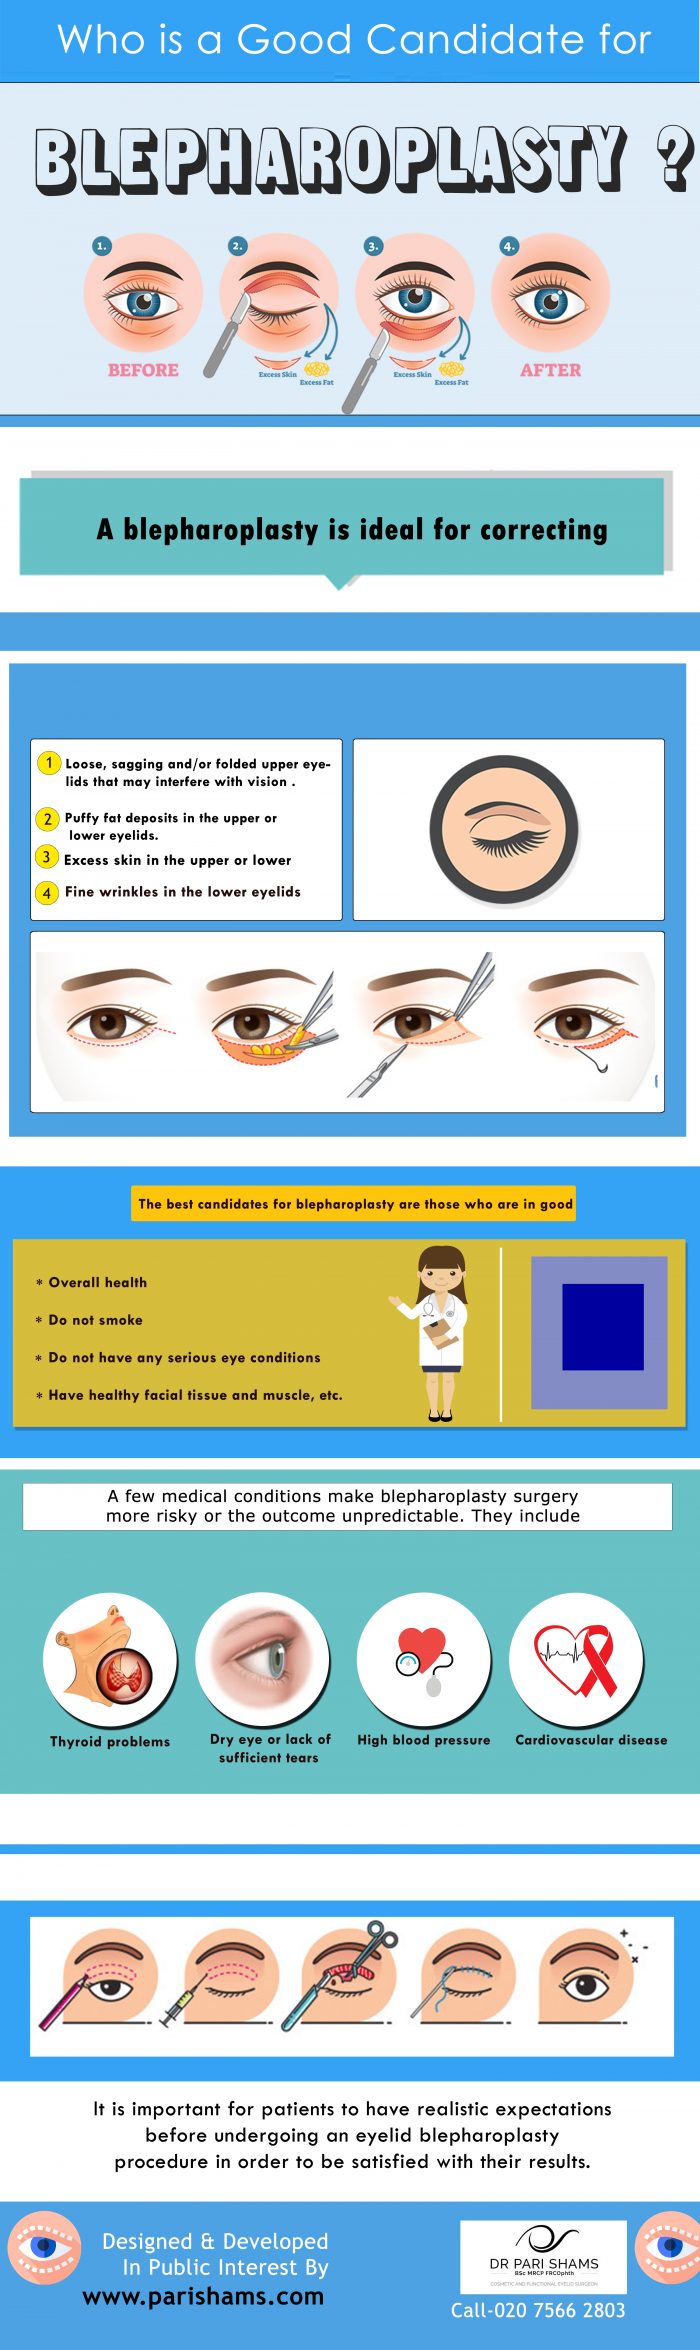 Who is a Good Candidate for Blepharoplasty?